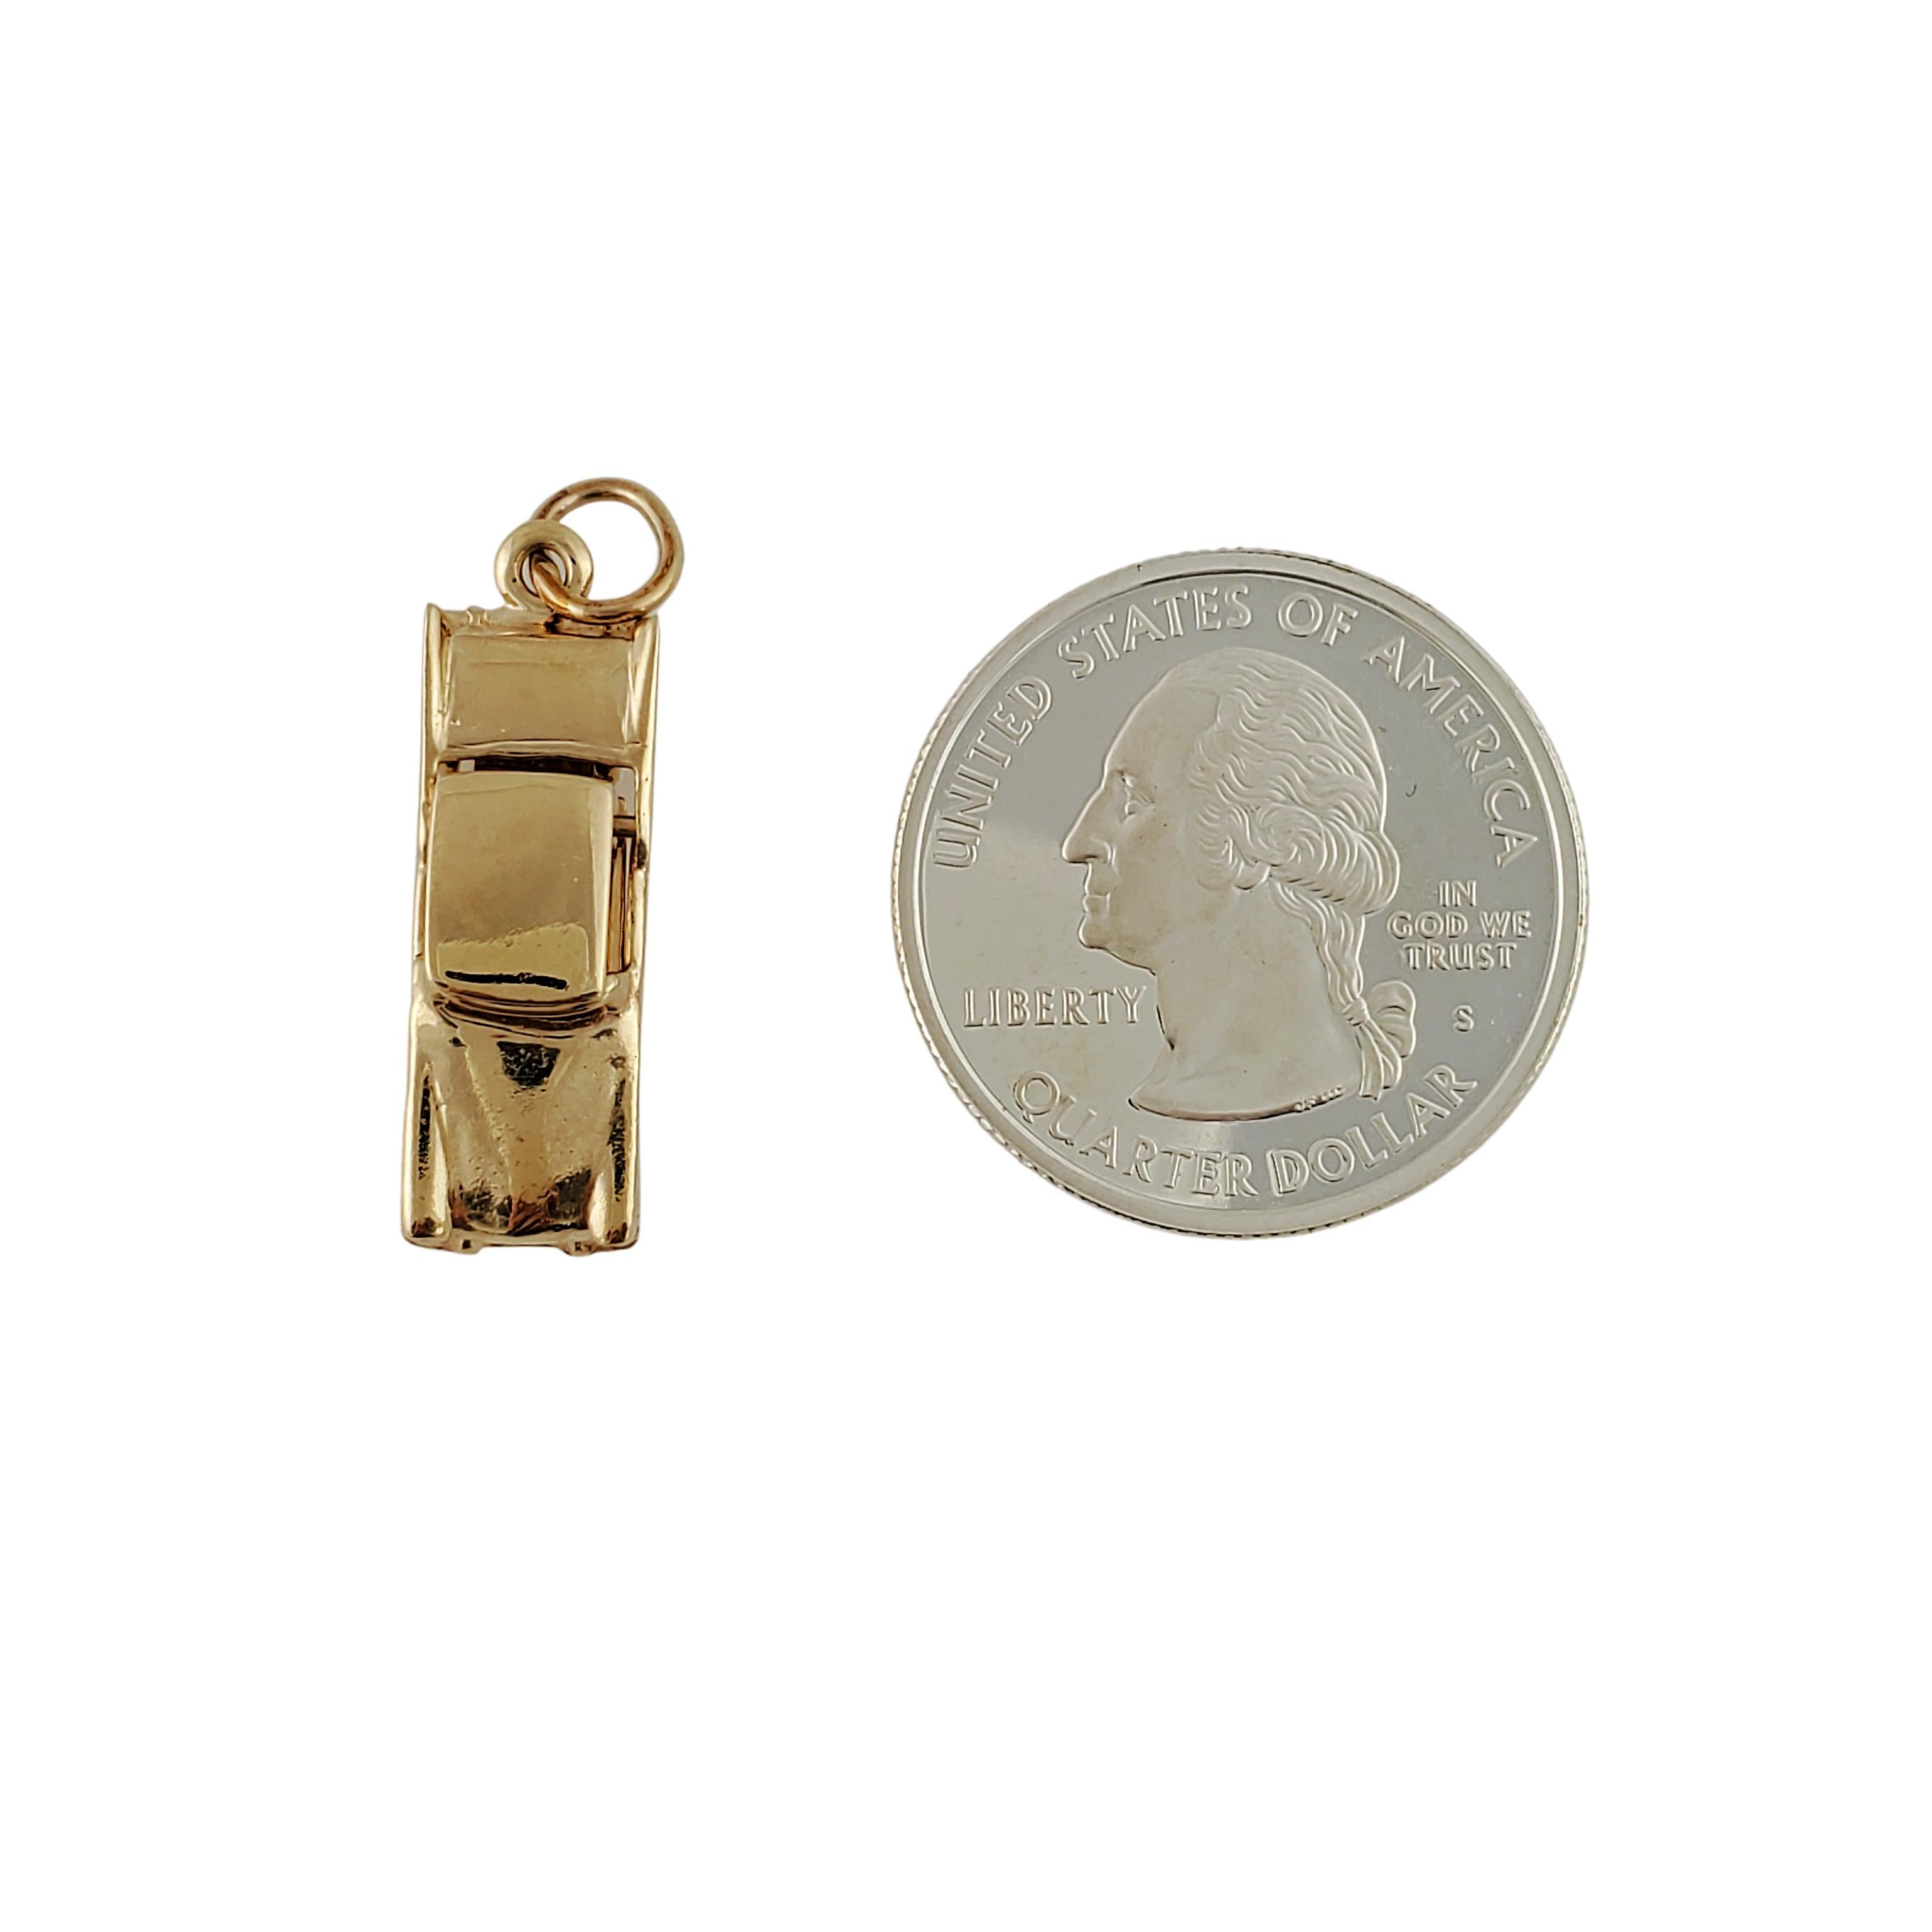 Vintage 14 Karat Yellow Gold Car Charm

This is a fantastic piece, featuring moving wheels, incredible detailing, and beautiful 14K gold. 

*Chain not included

Size: 23 mm x 8.5 mm (actual charm)

Weight: 2.7 dwt / 4.2 g.

Very good condition,